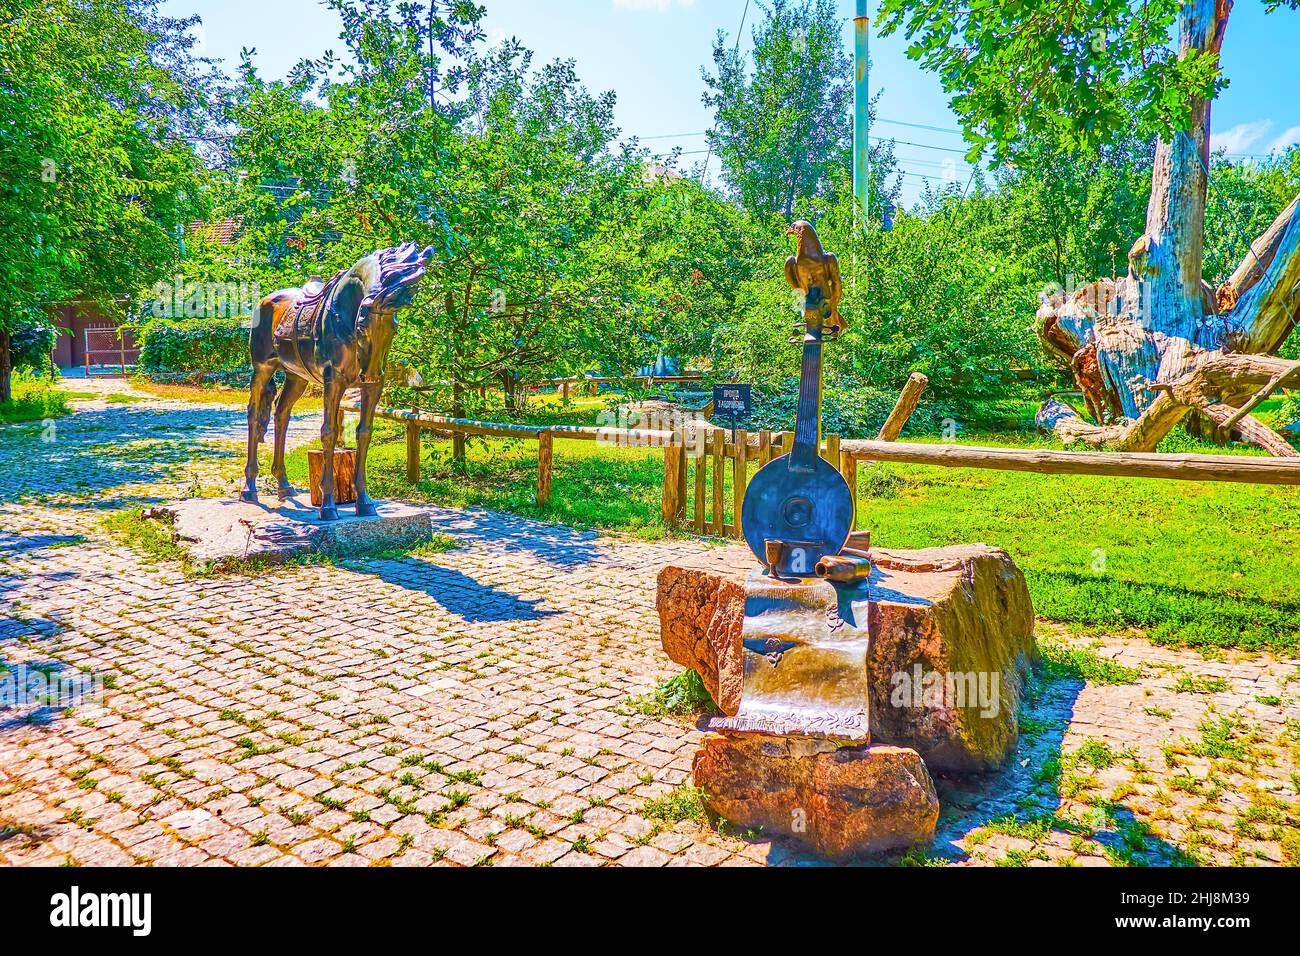 The bronze sculptures of main cossack attributes, the horse and kobza, the traditional musical instrument, Zaporizhzhia, Ukraine Stock Photo